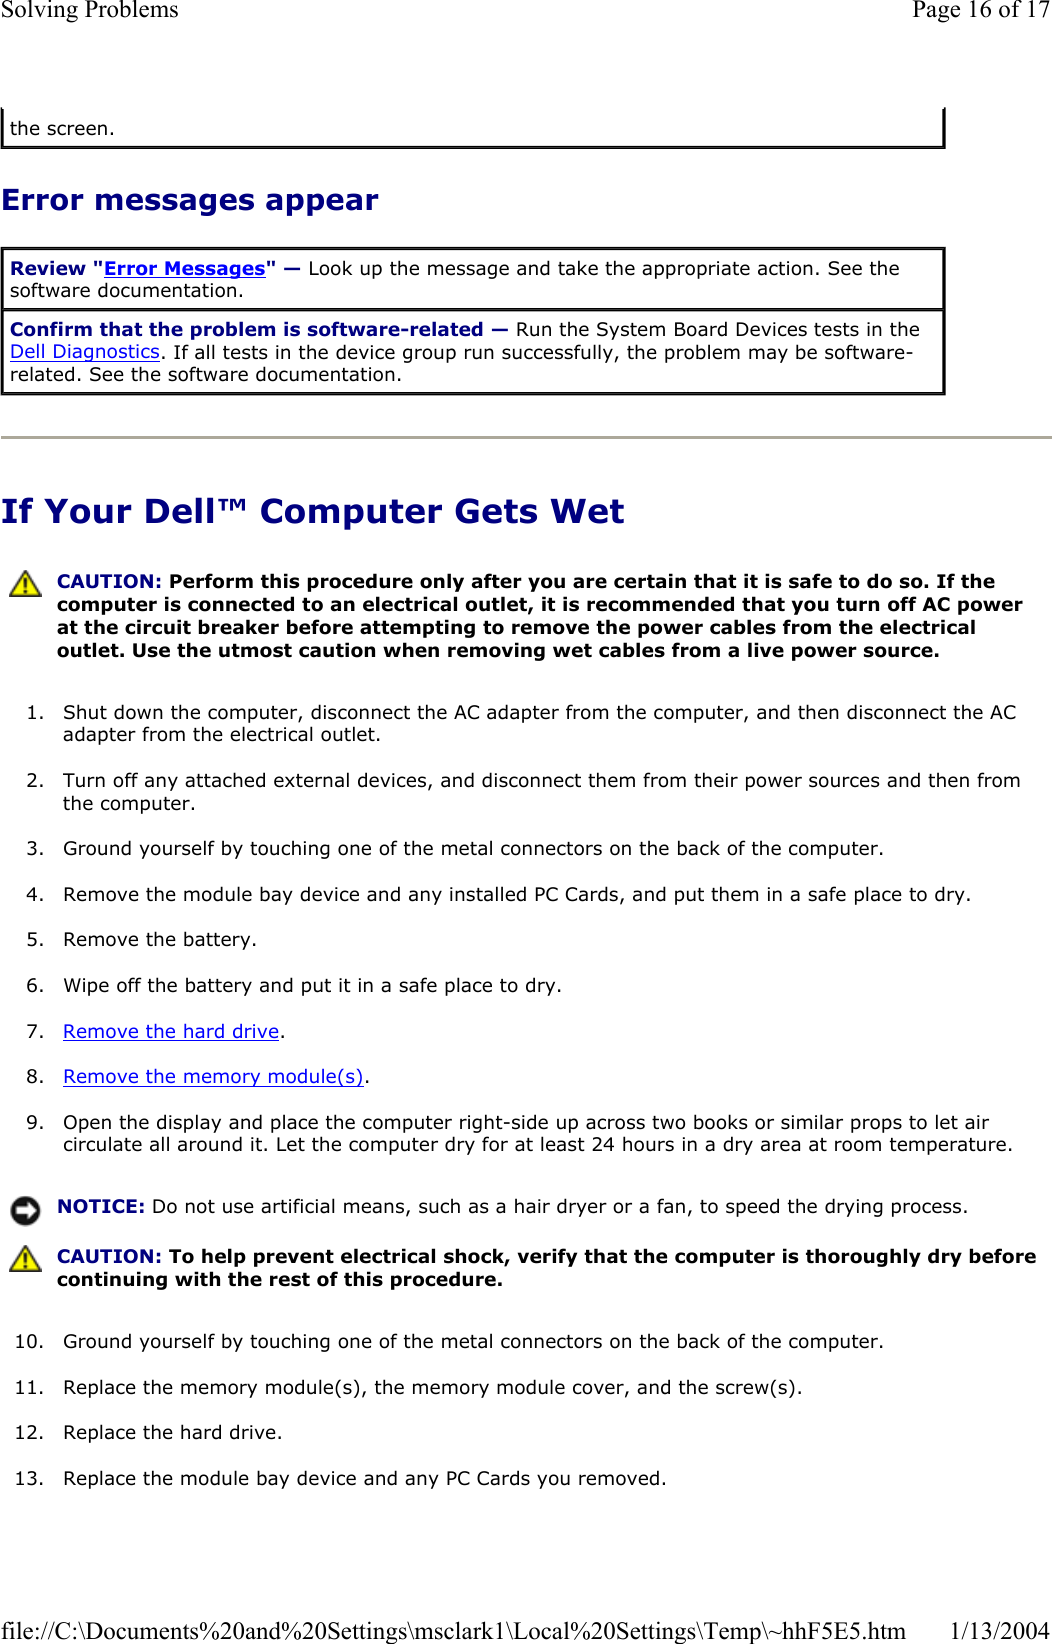 Error messages appear If Your Dell™ Computer Gets Wet 1. Shut down the computer, disconnect the AC adapter from the computer, and then disconnect the AC adapter from the electrical outlet. 2. Turn off any attached external devices, and disconnect them from their power sources and then from the computer. 3. Ground yourself by touching one of the metal connectors on the back of the computer. 4. Remove the module bay device and any installed PC Cards, and put them in a safe place to dry. 5. Remove the battery. 6. Wipe off the battery and put it in a safe place to dry. 7. Remove the hard drive.8. Remove the memory module(s).9. Open the display and place the computer right-side up across two books or similar props to let air circulate all around it. Let the computer dry for at least 24 hours in a dry area at room temperature. 10. Ground yourself by touching one of the metal connectors on the back of the computer. 11. Replace the memory module(s), the memory module cover, and the screw(s). 12. Replace the hard drive. 13. Replace the module bay device and any PC Cards you removed. the screen. Review &quot;Error Messages&quot; — Look up the message and take the appropriate action. See the software documentation. Confirm that the problem is software-related — Run the System Board Devices tests in the Dell Diagnostics. If all tests in the device group run successfully, the problem may be software-related. See the software documentation. CAUTION: Perform this procedure only after you are certain that it is safe to do so. If the computer is connected to an electrical outlet, it is recommended that you turn off AC power at the circuit breaker before attempting to remove the power cables from the electrical outlet. Use the utmost caution when removing wet cables from a live power source. NOTICE: Do not use artificial means, such as a hair dryer or a fan, to speed the drying process. CAUTION: To help prevent electrical shock, verify that the computer is thoroughly dry before continuing with the rest of this procedure. Page 16 of 17Solving Problems1/13/2004file://C:\Documents%20and%20Settings\msclark1\Local%20Settings\Temp\~hhF5E5.htm